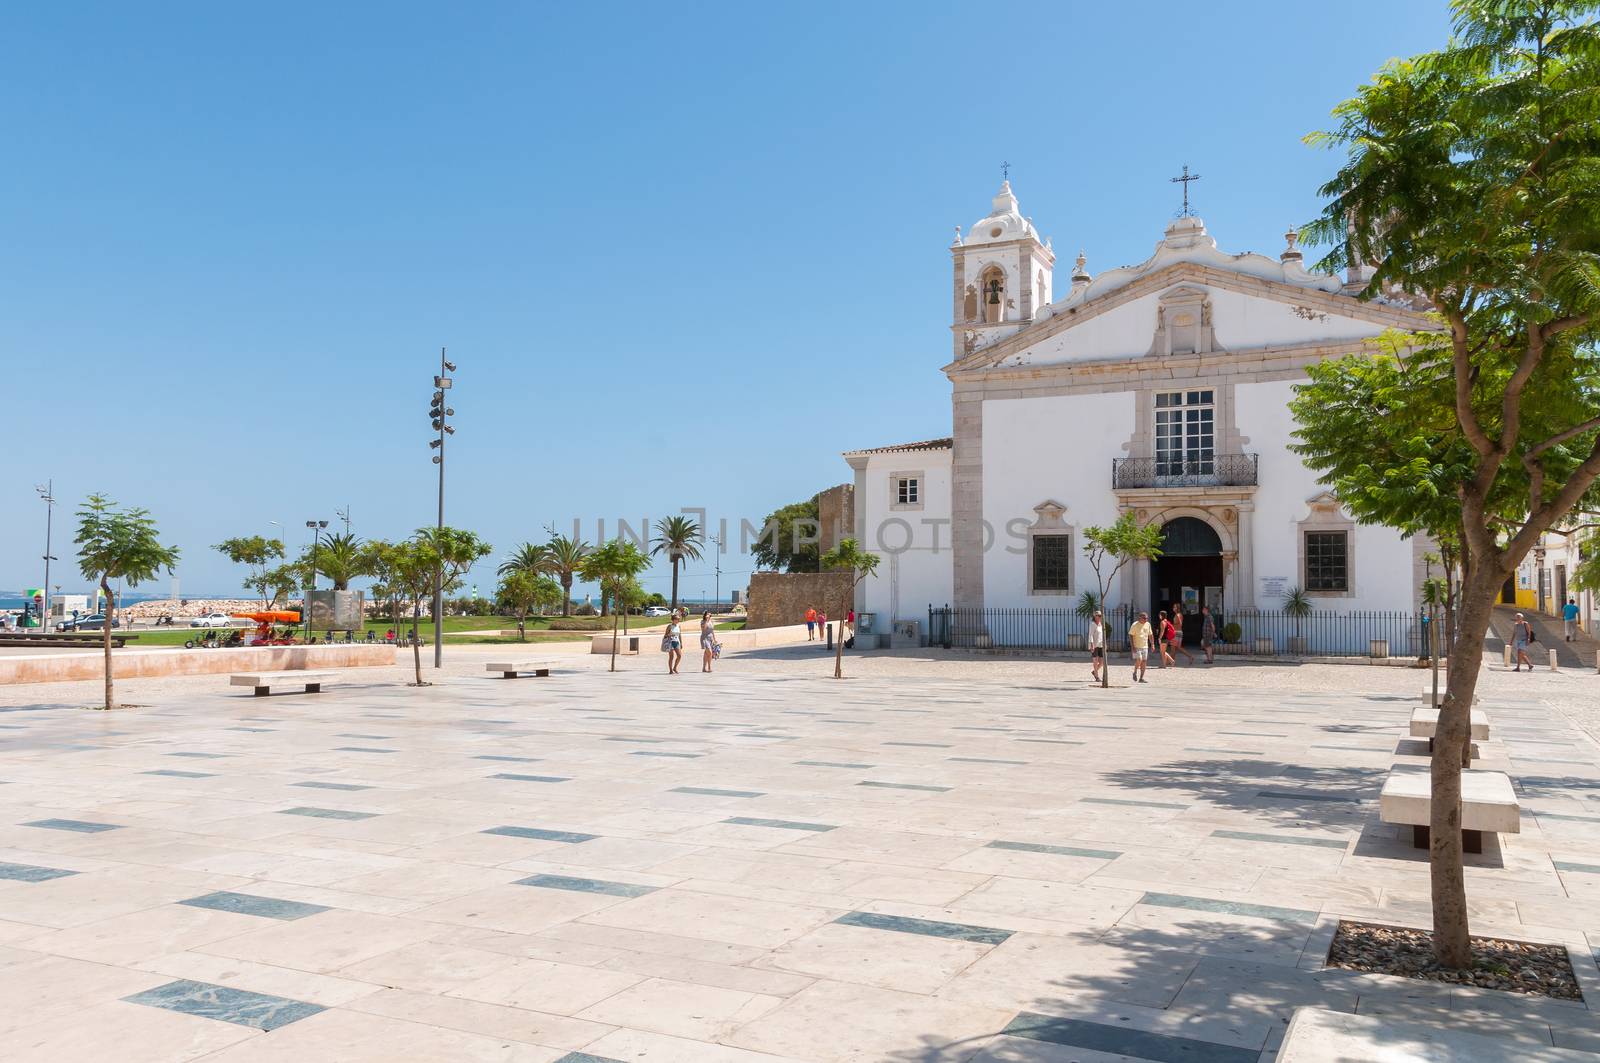 LAGOS, PORTUGAL - SEPTEMBER 1: Public square called Praca Infante Dom Henrique on 1 September, 2014 in Lagos. Lagos is one of the most visited cities in the Algarve and Portugal.